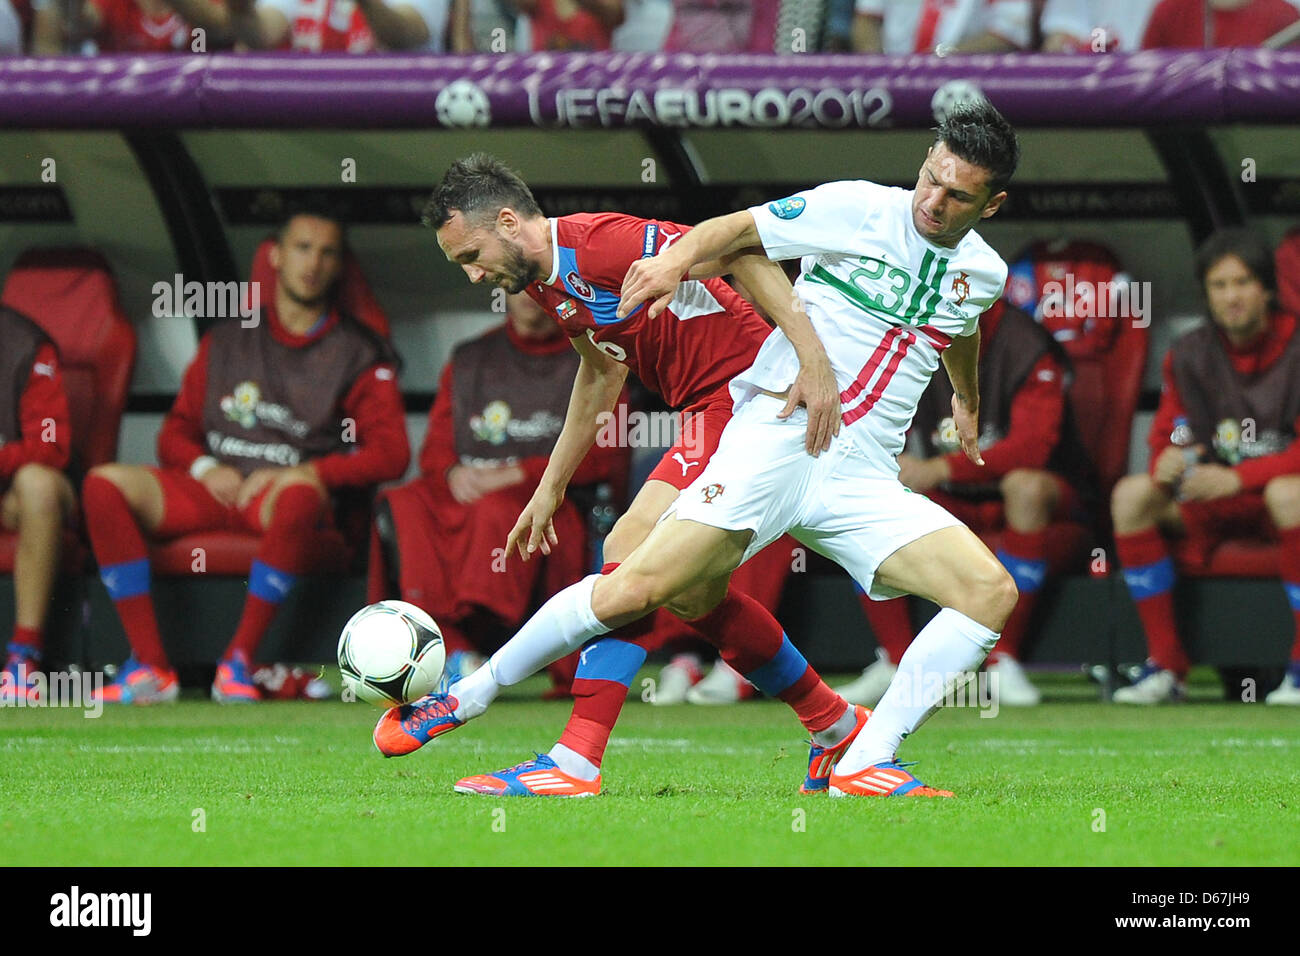 Portugal's Helder Postiga (r) plays against  Czech Republic's Tomas Sivok during a Euro 2012 quarter final match between the Czech Republic and Portugal in Warsaw, Portugal, 21 June 2012. Photo: Revierfoto Stock Photo